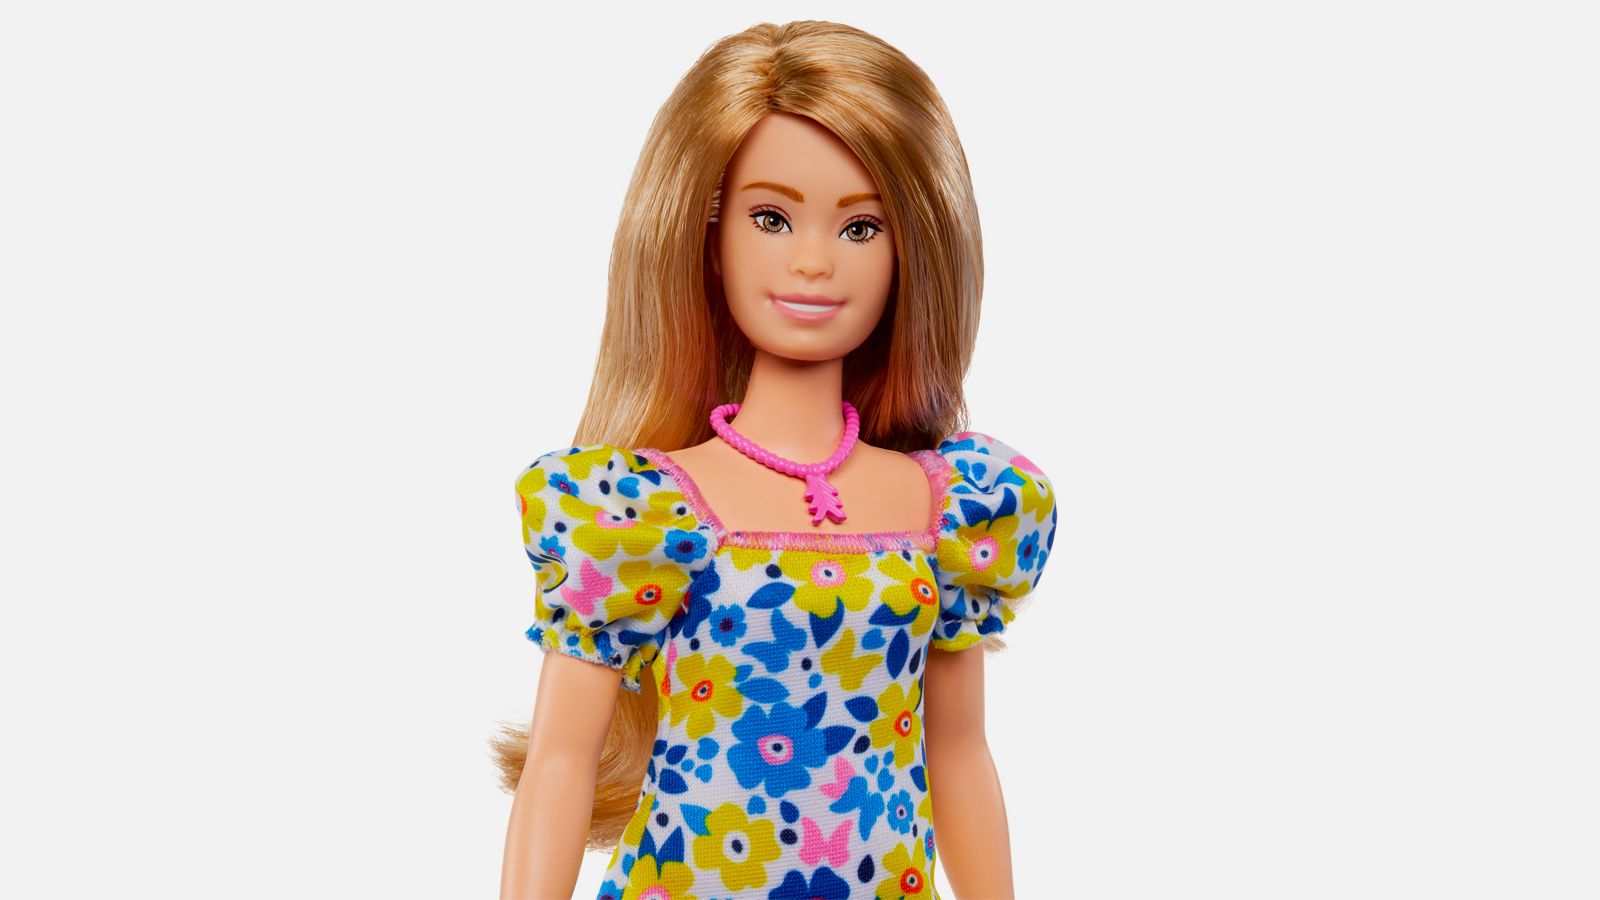 New Barbie doll to help children feel better represented